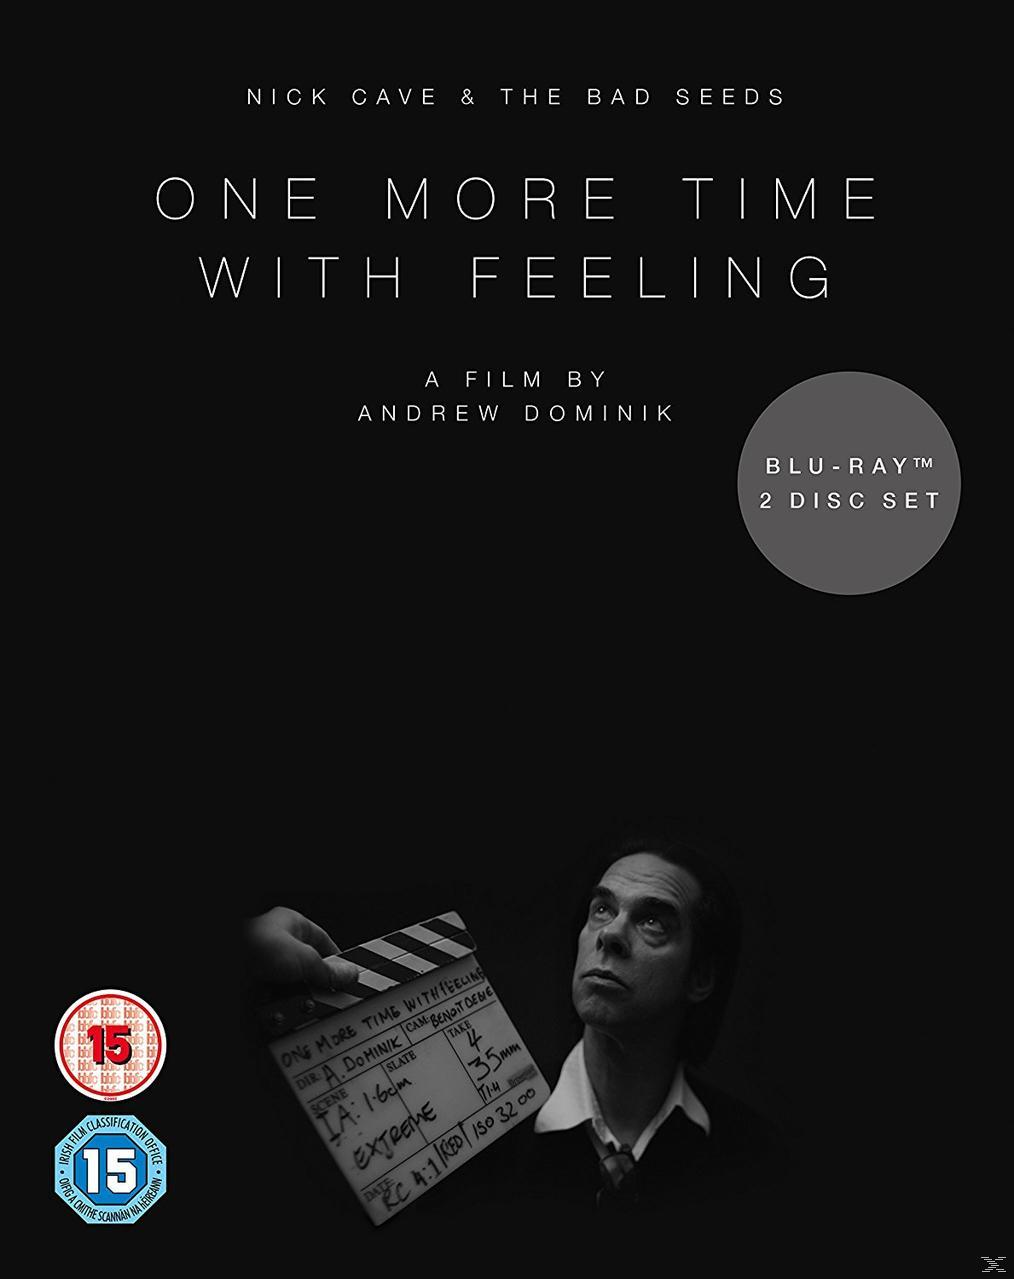 - More Nick Seeds & Bad Time Blu-Ray) - One With Feeling (2x Cave The (Blu-ray)